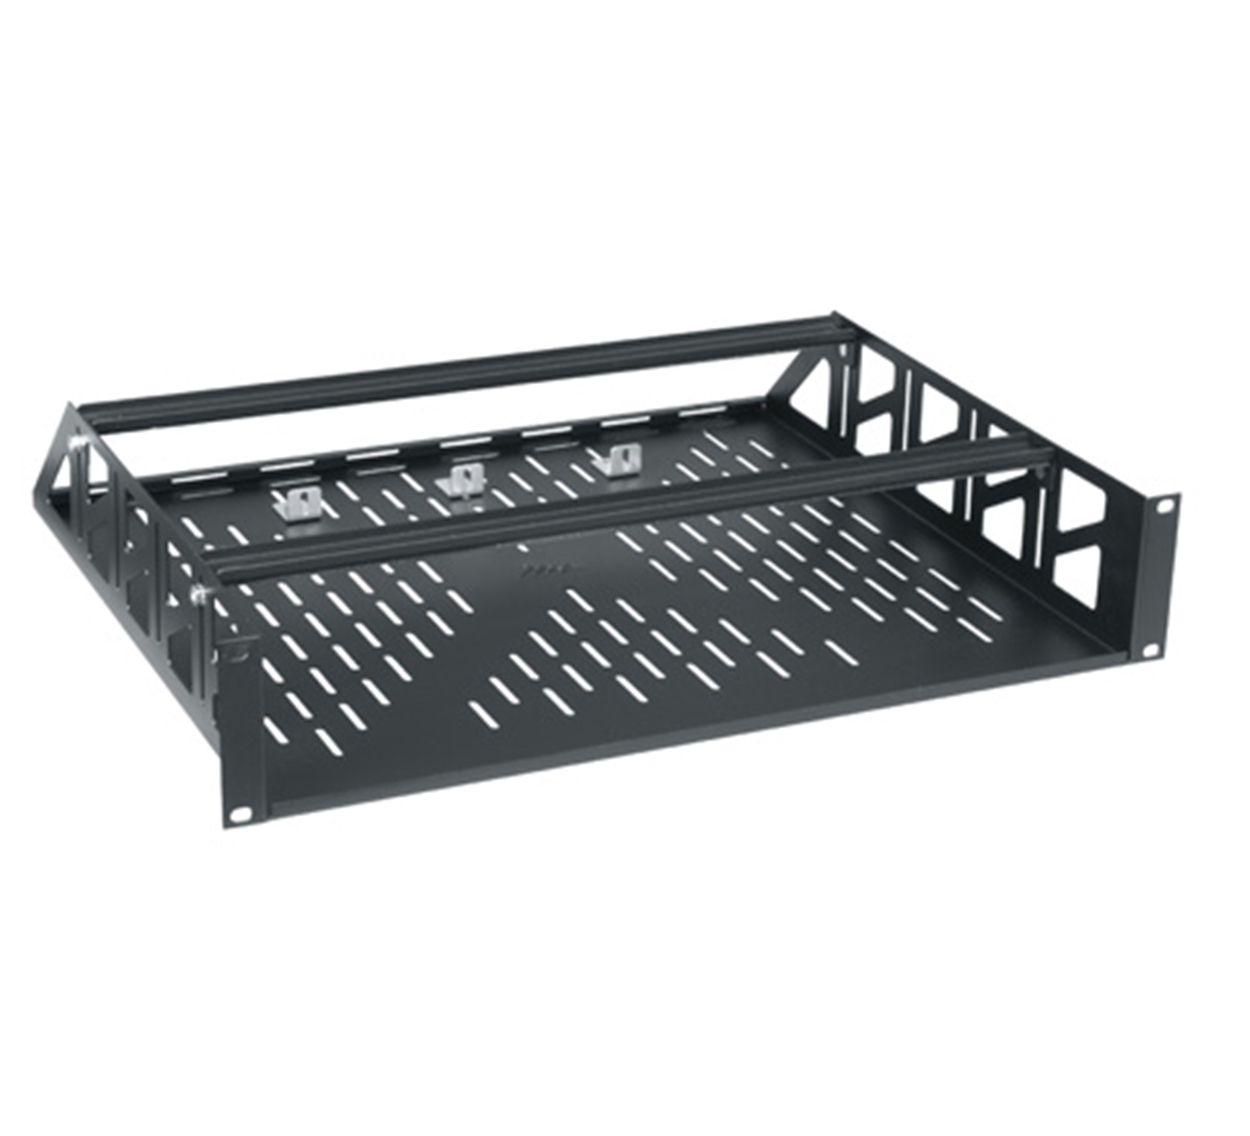 RC-2 Middle Atlantic Products 2SP CLAMPING RACKSHELF